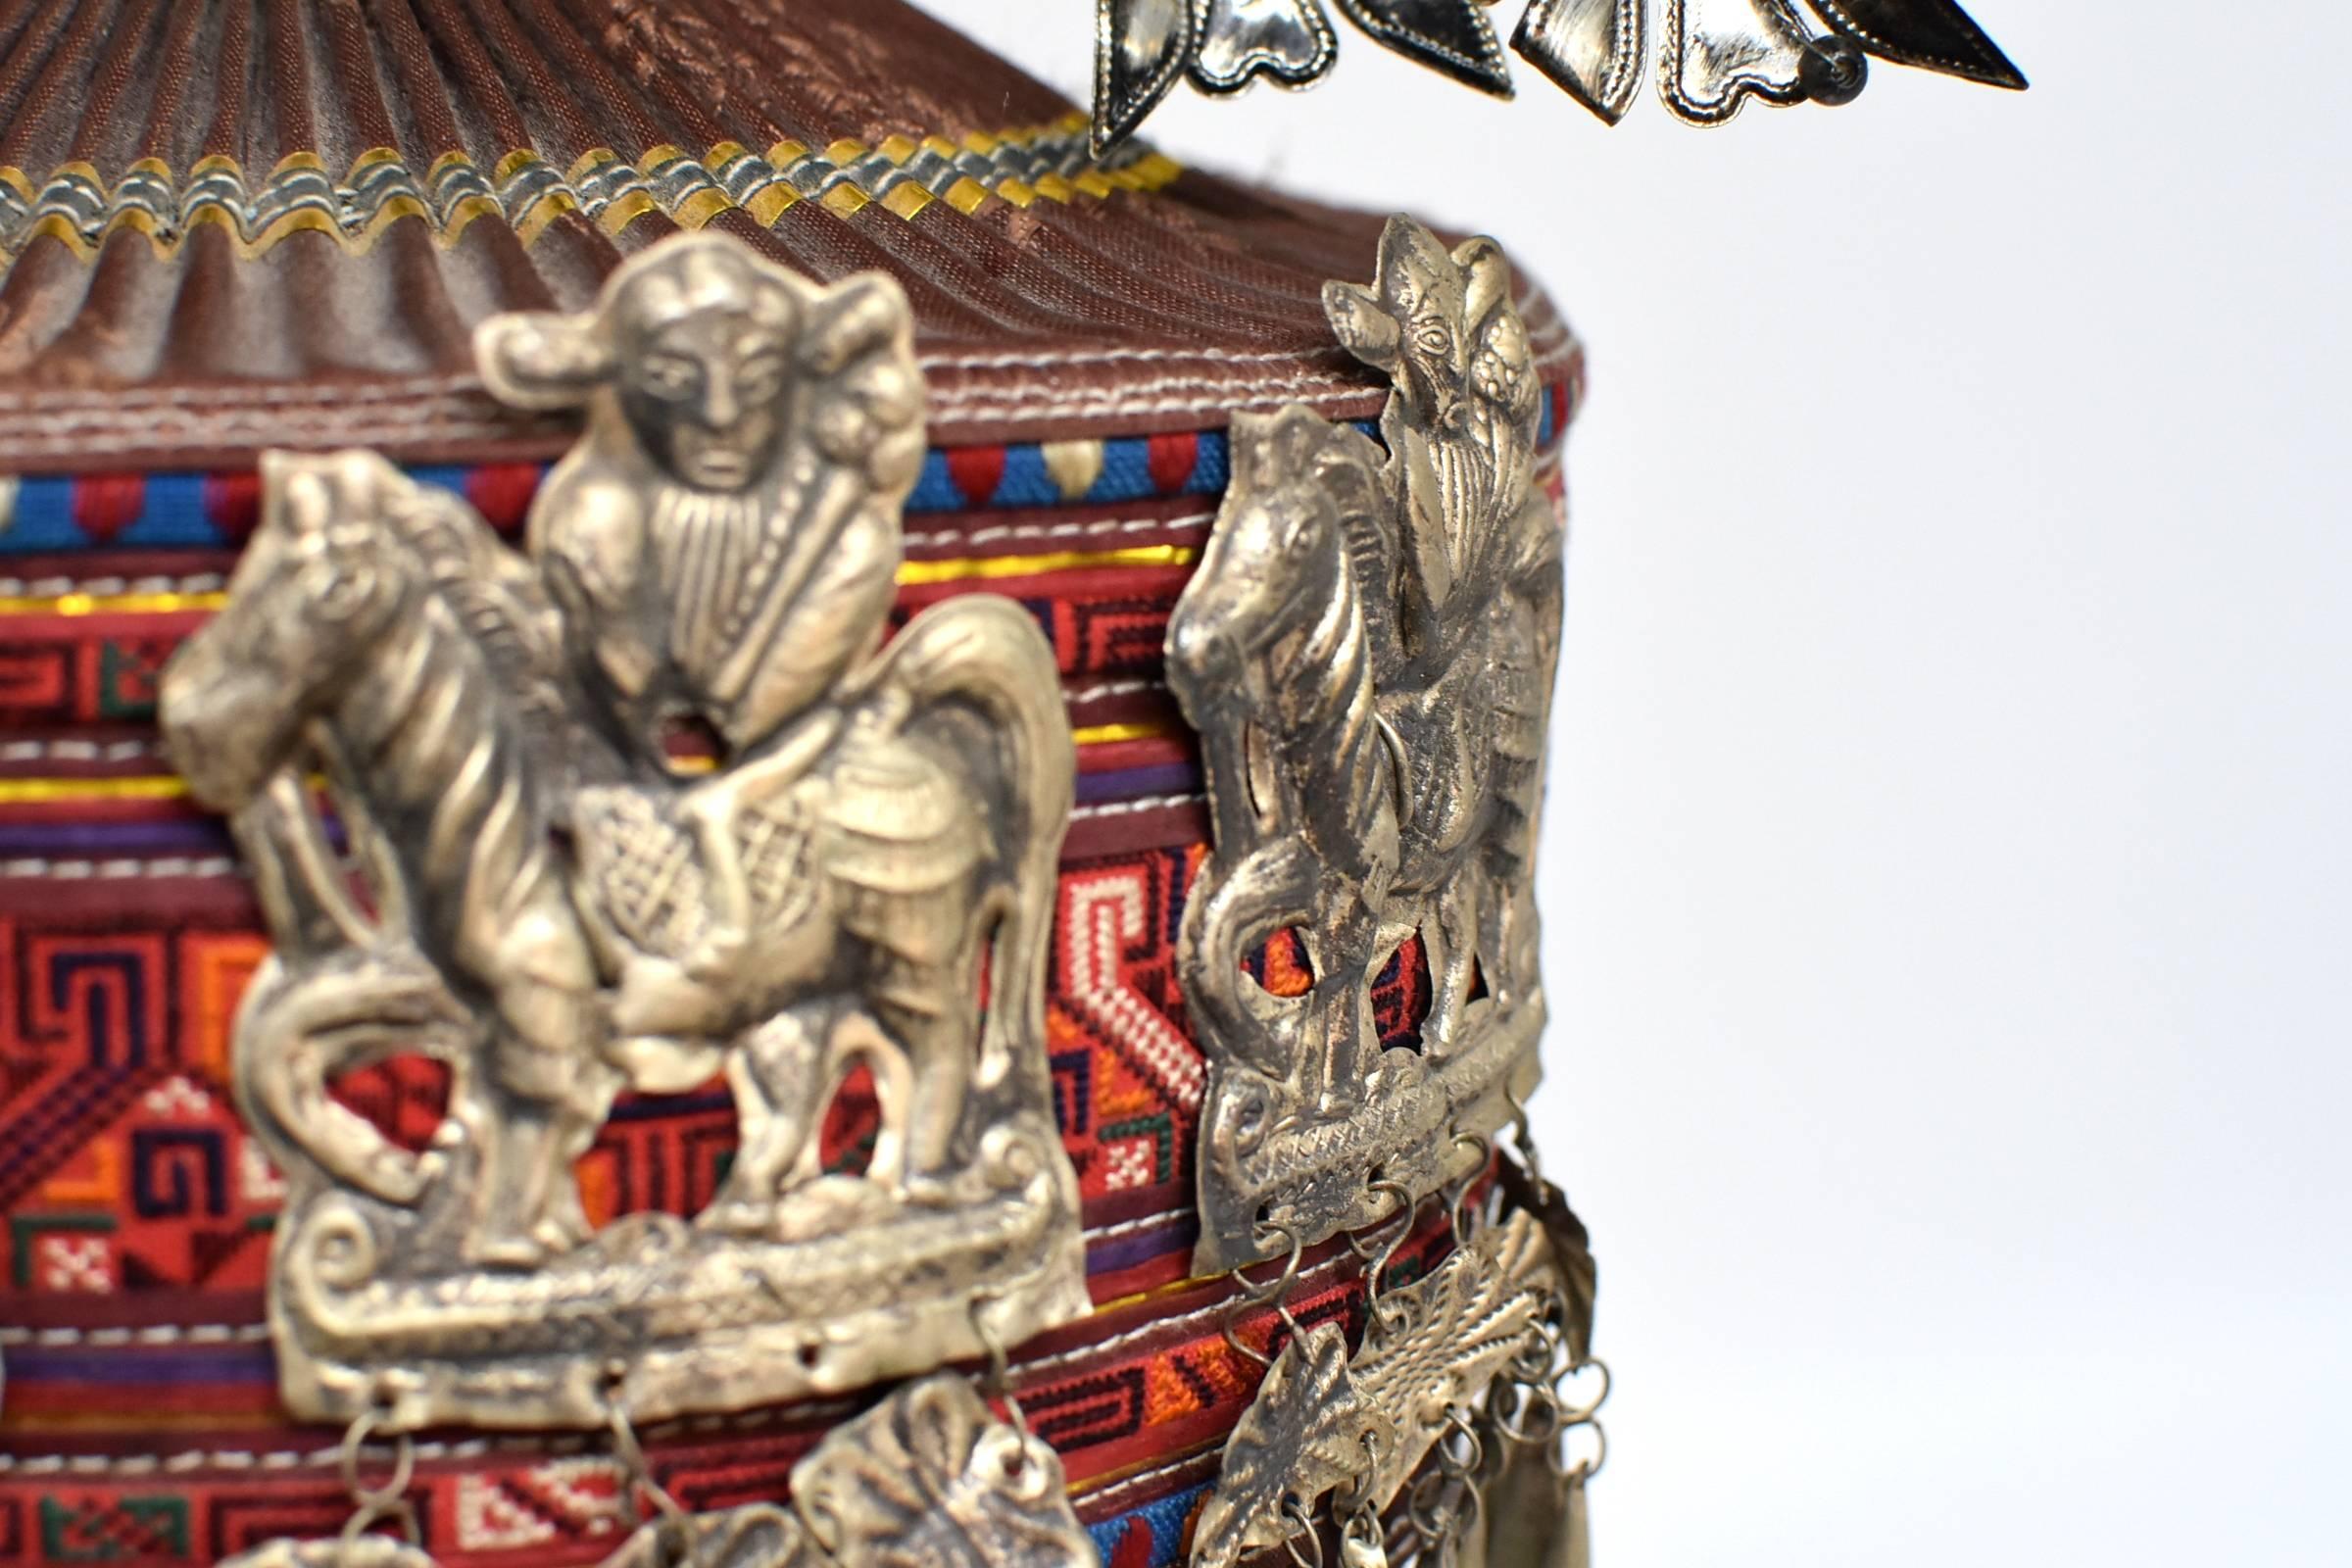 A special Chinese tribal hat made with handwoven tapestry and decorated with beautiful silvered ornaments. The amazing elaborate ornaments consist of multiple flowers and pair of birds, all hand made from silvered metal. The main 